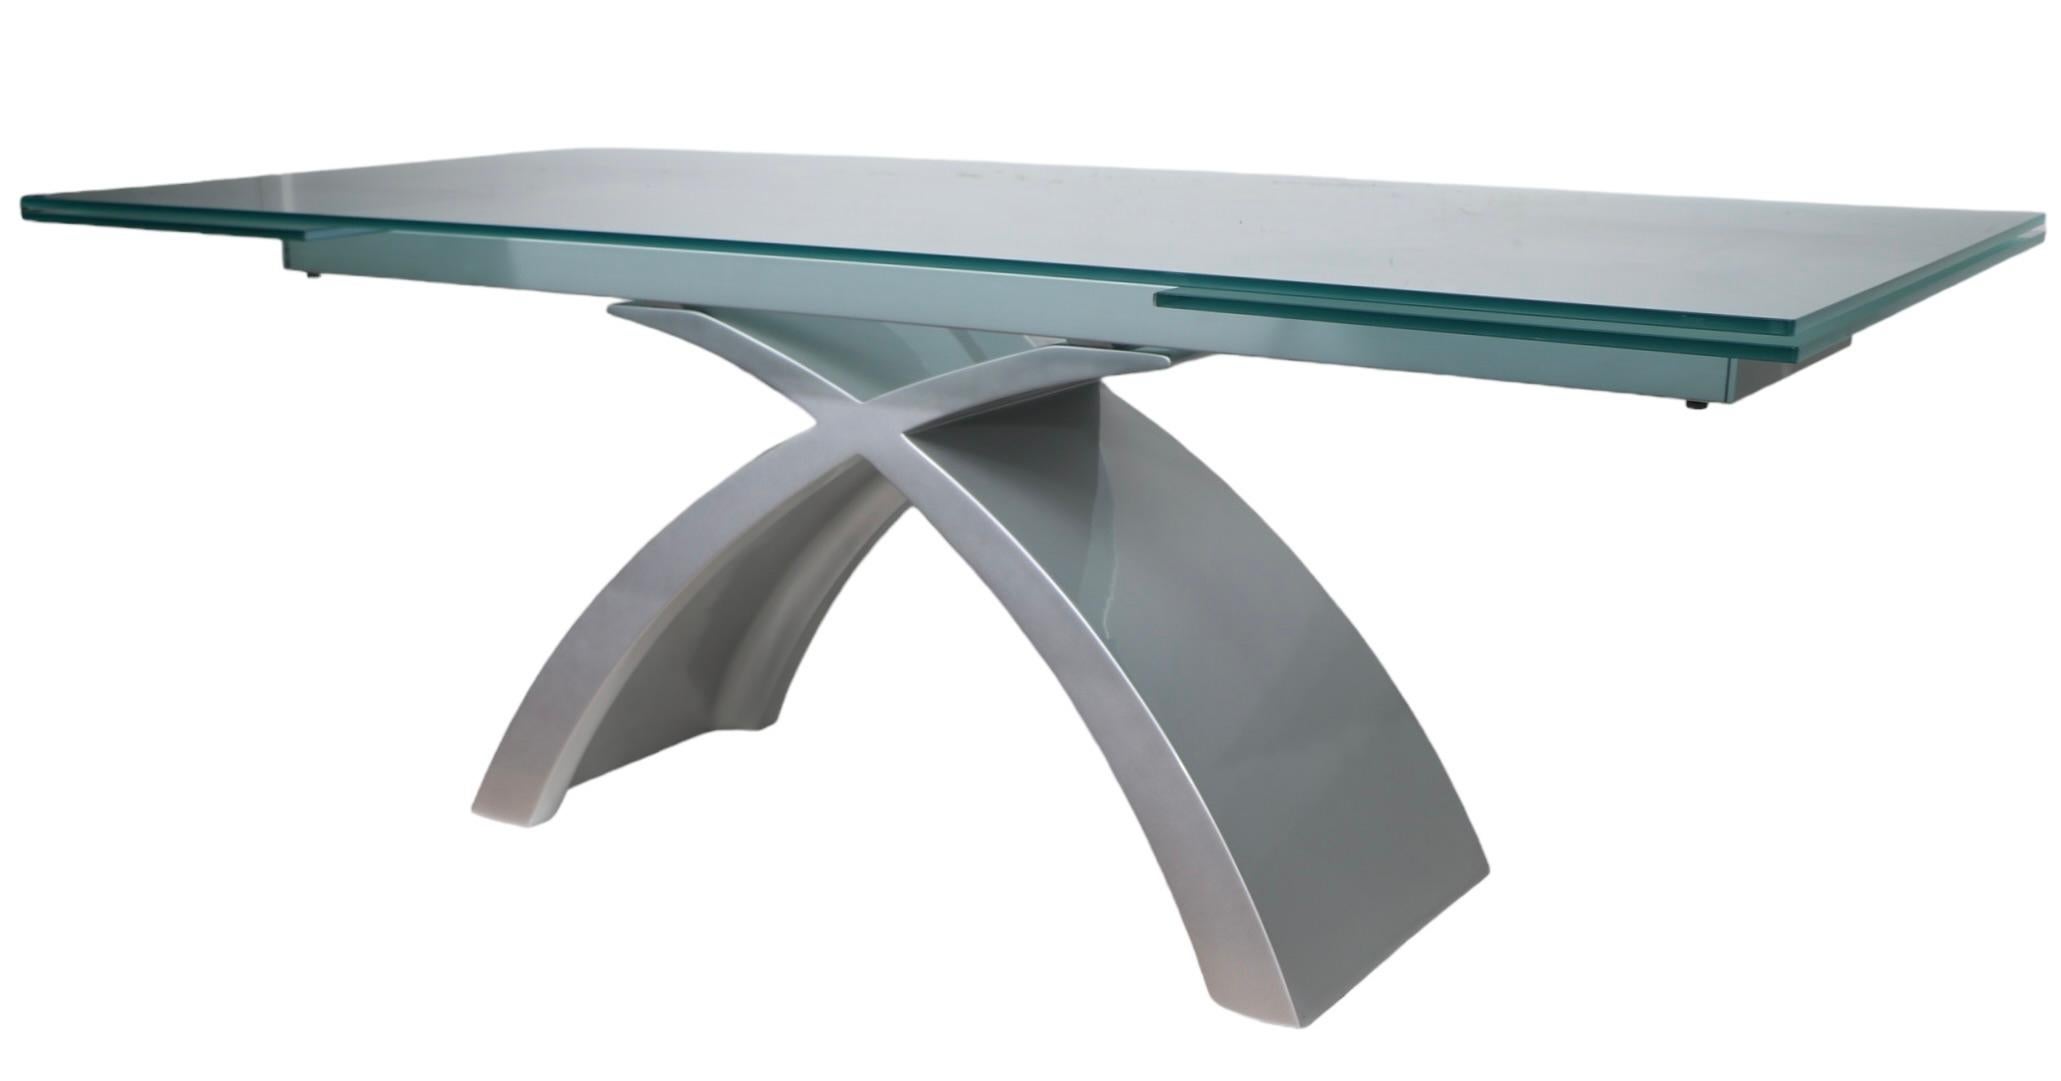  Italian Post Modern Contemporary  Extension Dining Table Tokyo by Tonin  For Sale 10